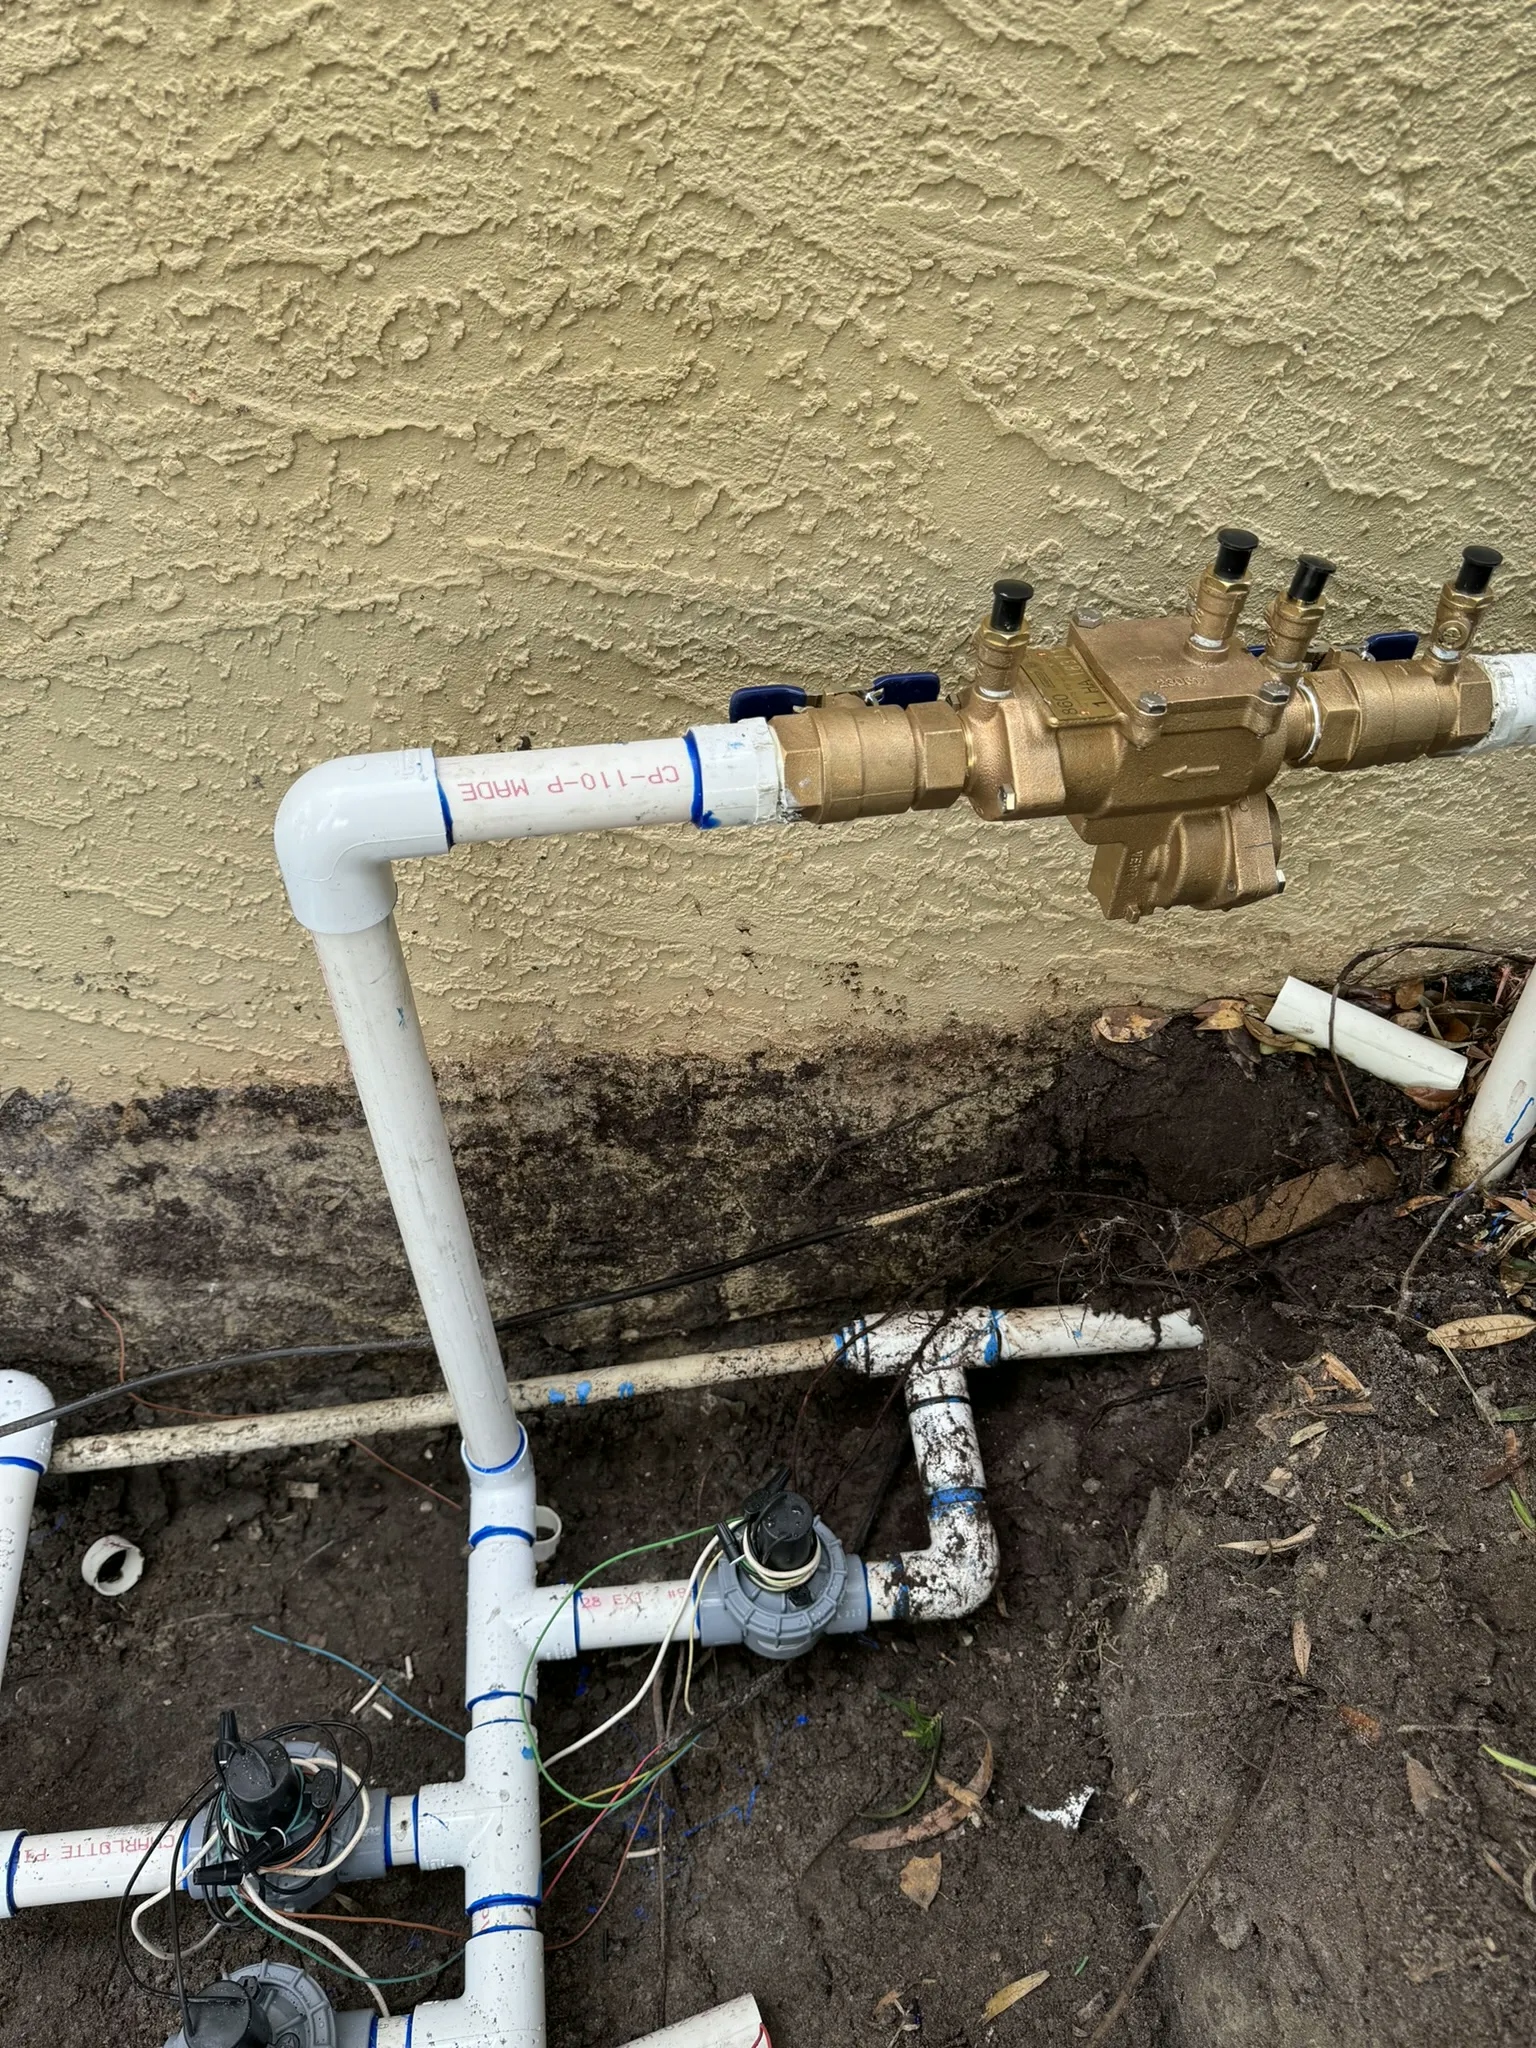 A residential sprinkler system PVC pipe installation with a brass manifold and electrical wires.